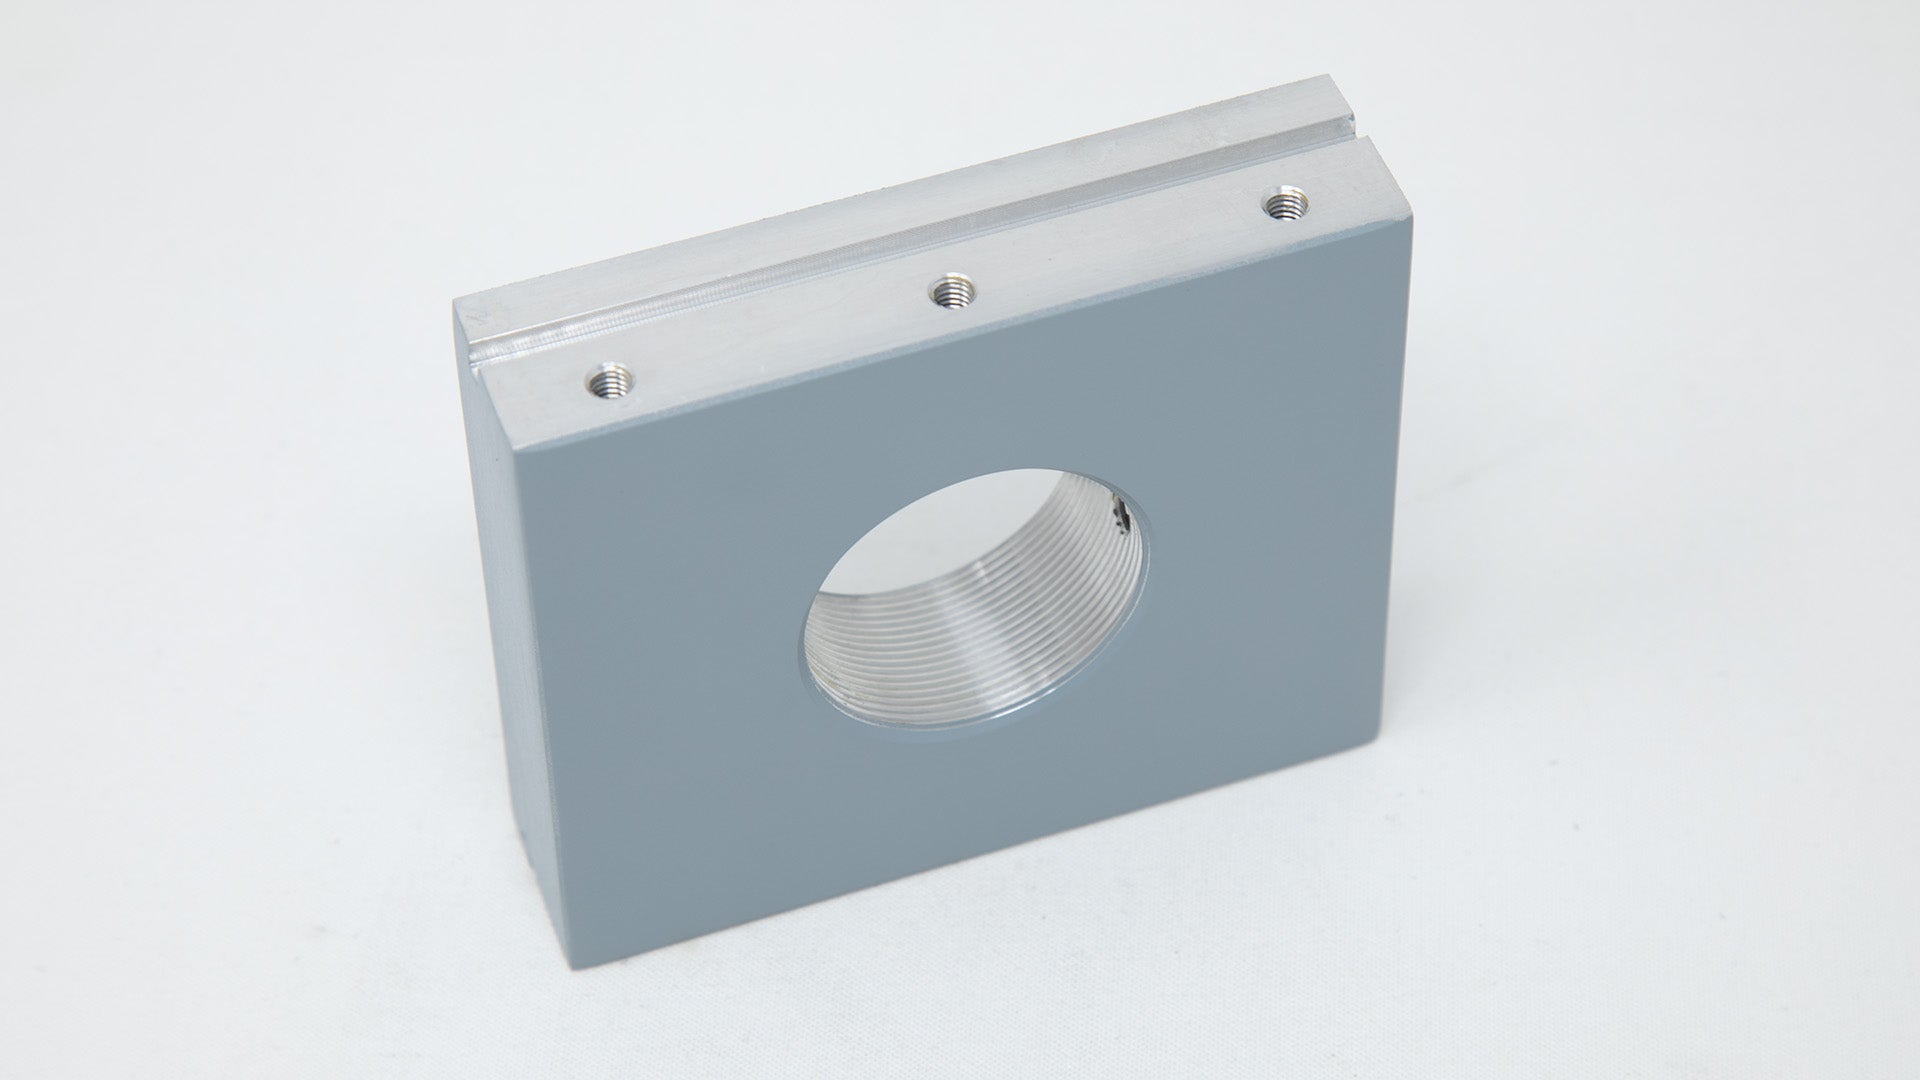 Square mounting plate with threaded ports.